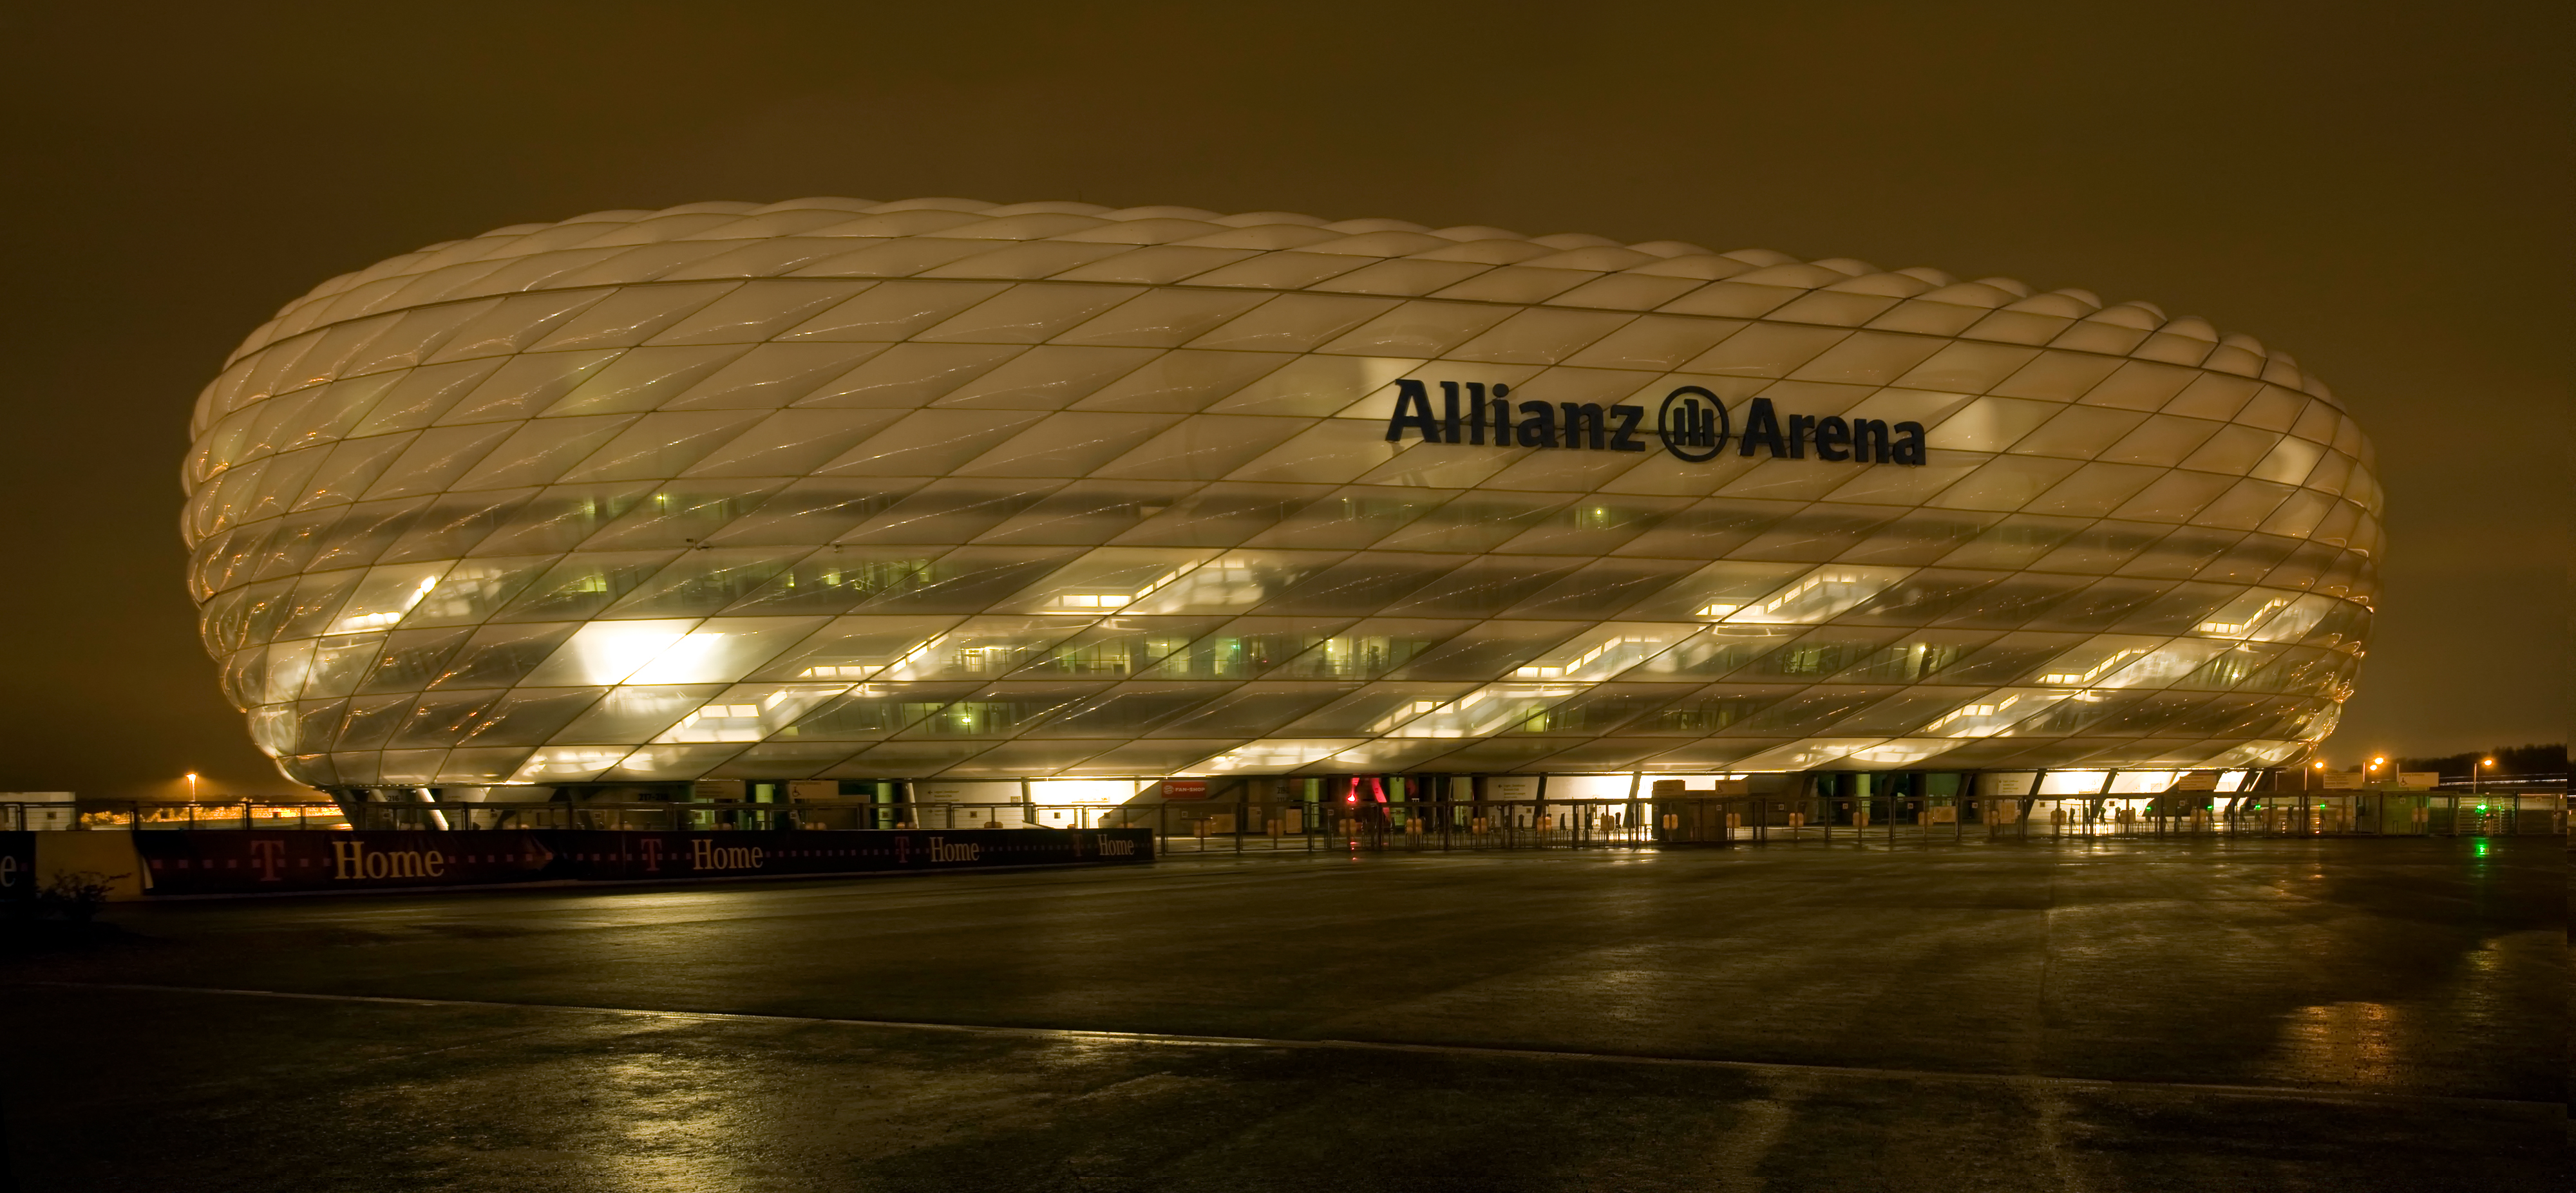 Allianz Arena by night